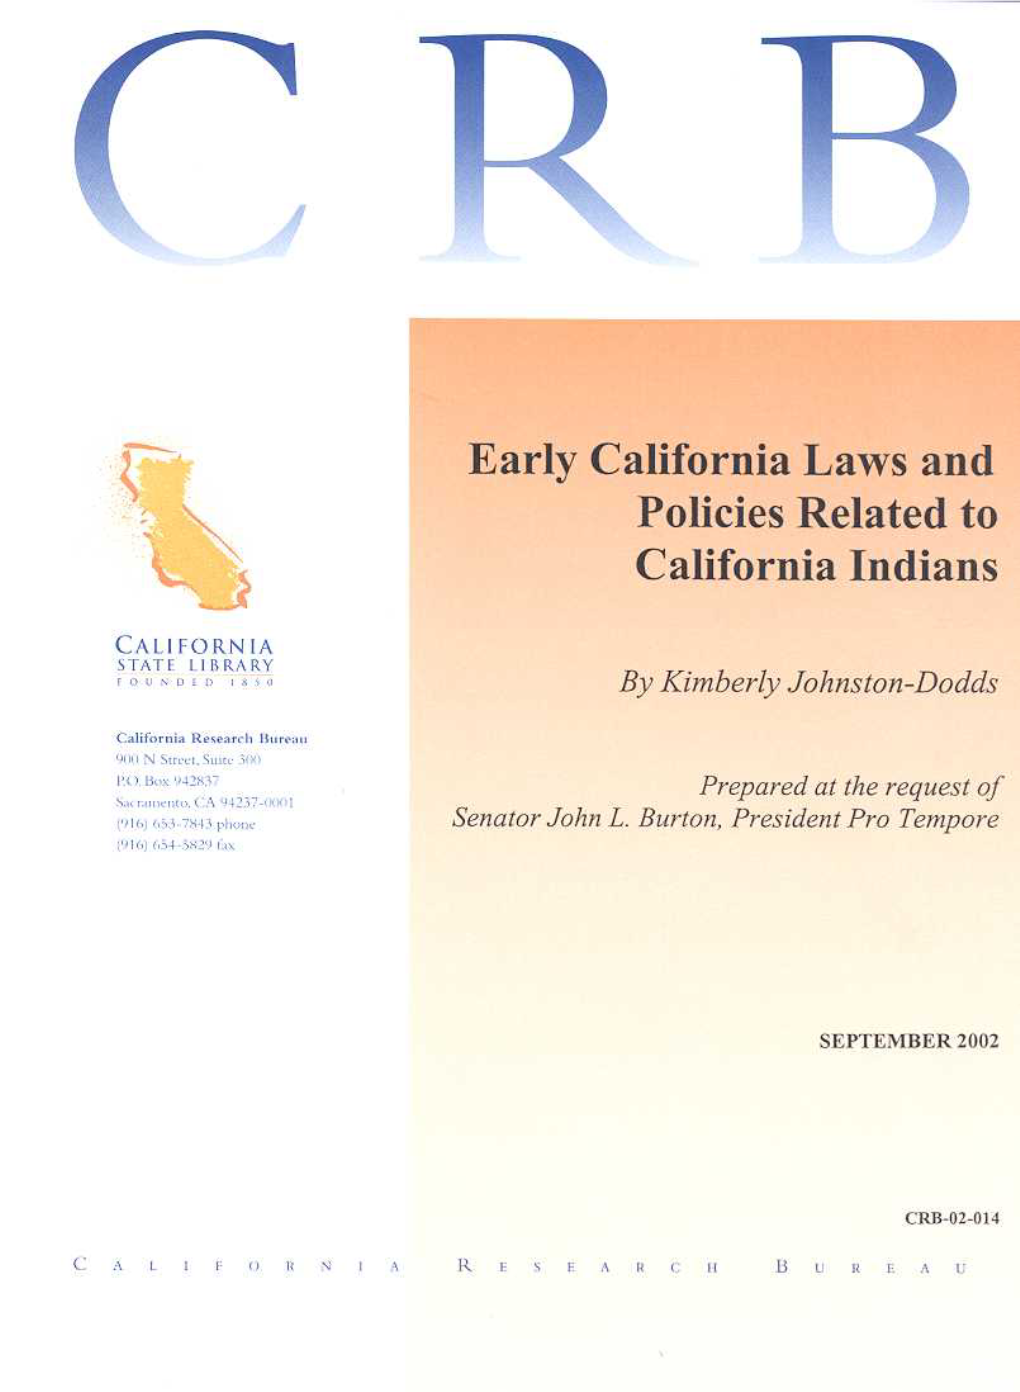 Early California Laws and Policies Related to California Indians